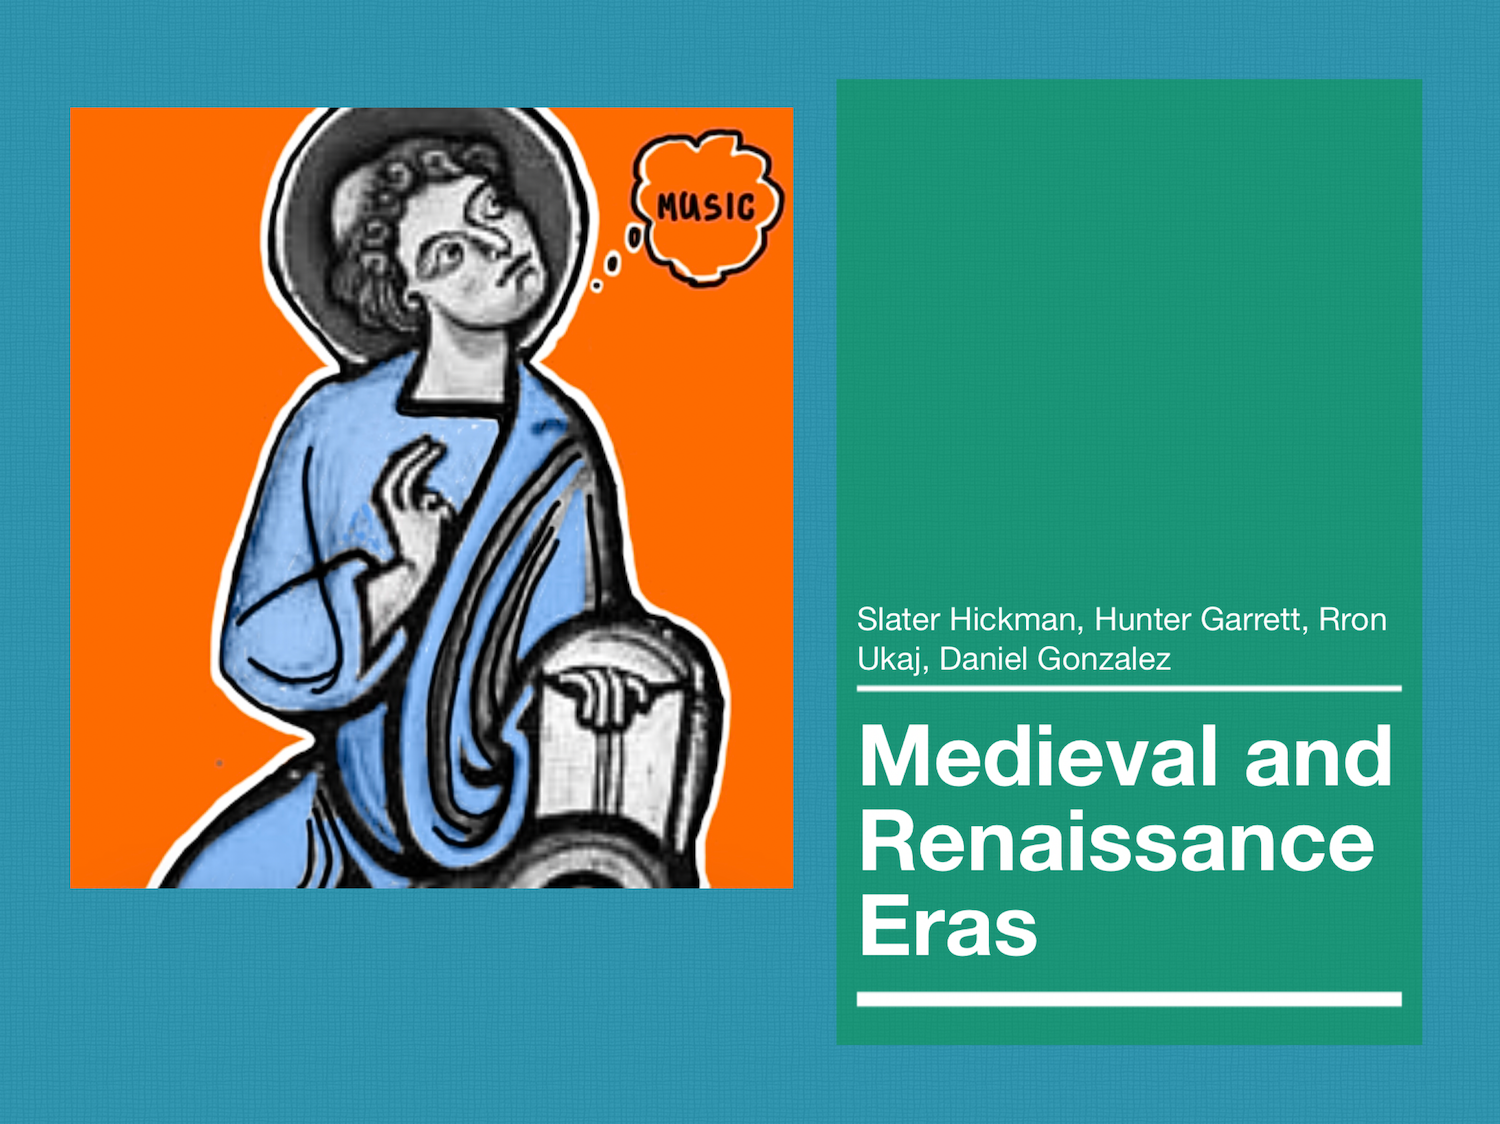 Cover to the Medieval and Renaissance textbook featuring an image of a composer created with the pop art activity.